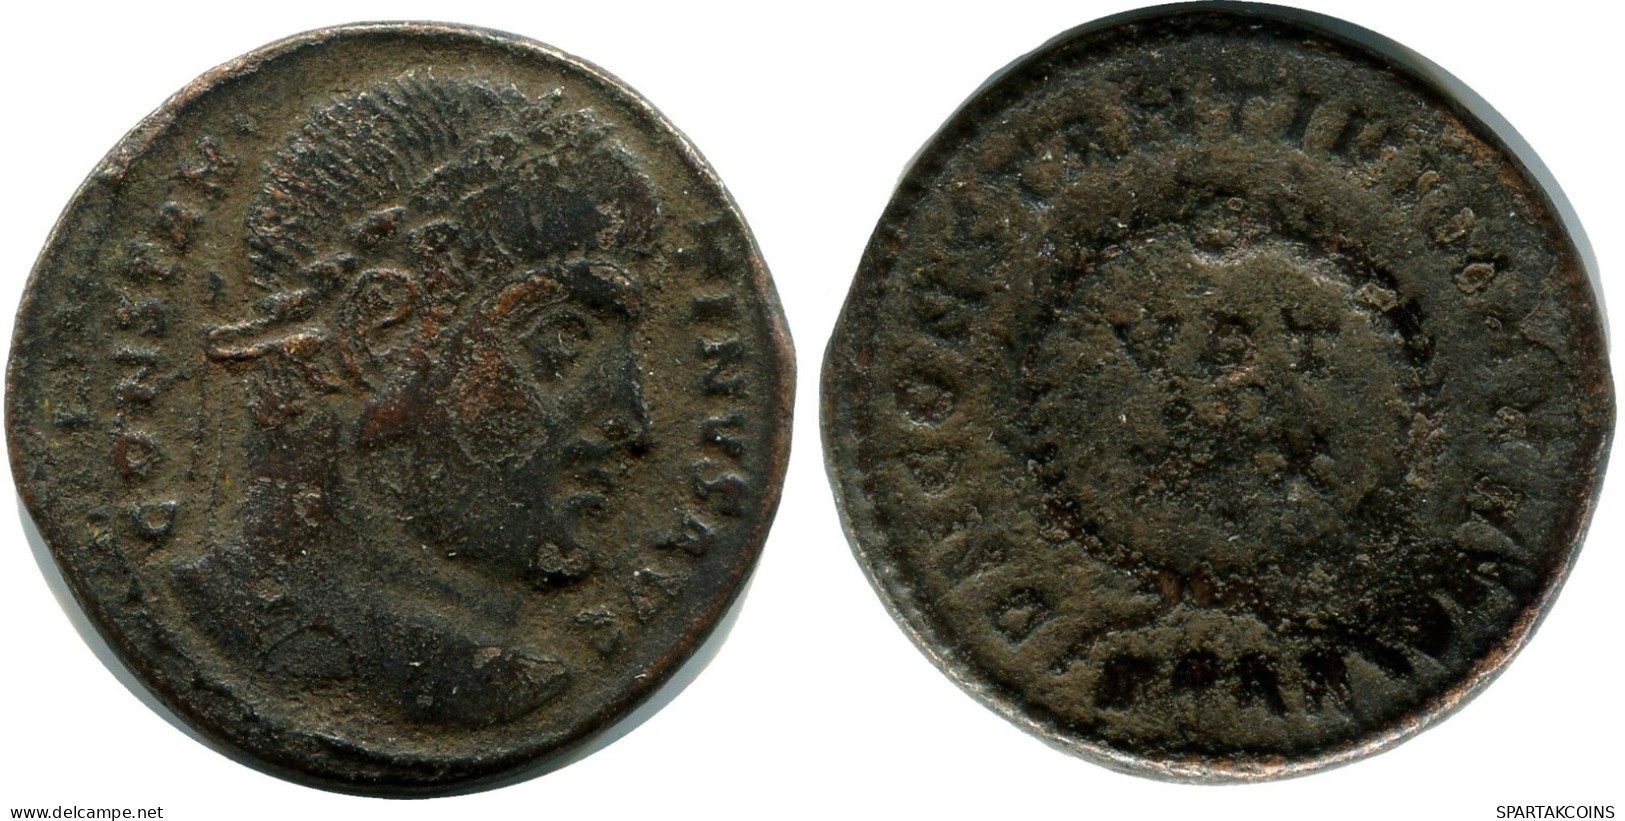 CONSTANTINE I MINTED IN HERACLEA FOUND IN IHNASYAH HOARD EGYPT #ANC11216.14.U.A - The Christian Empire (307 AD To 363 AD)